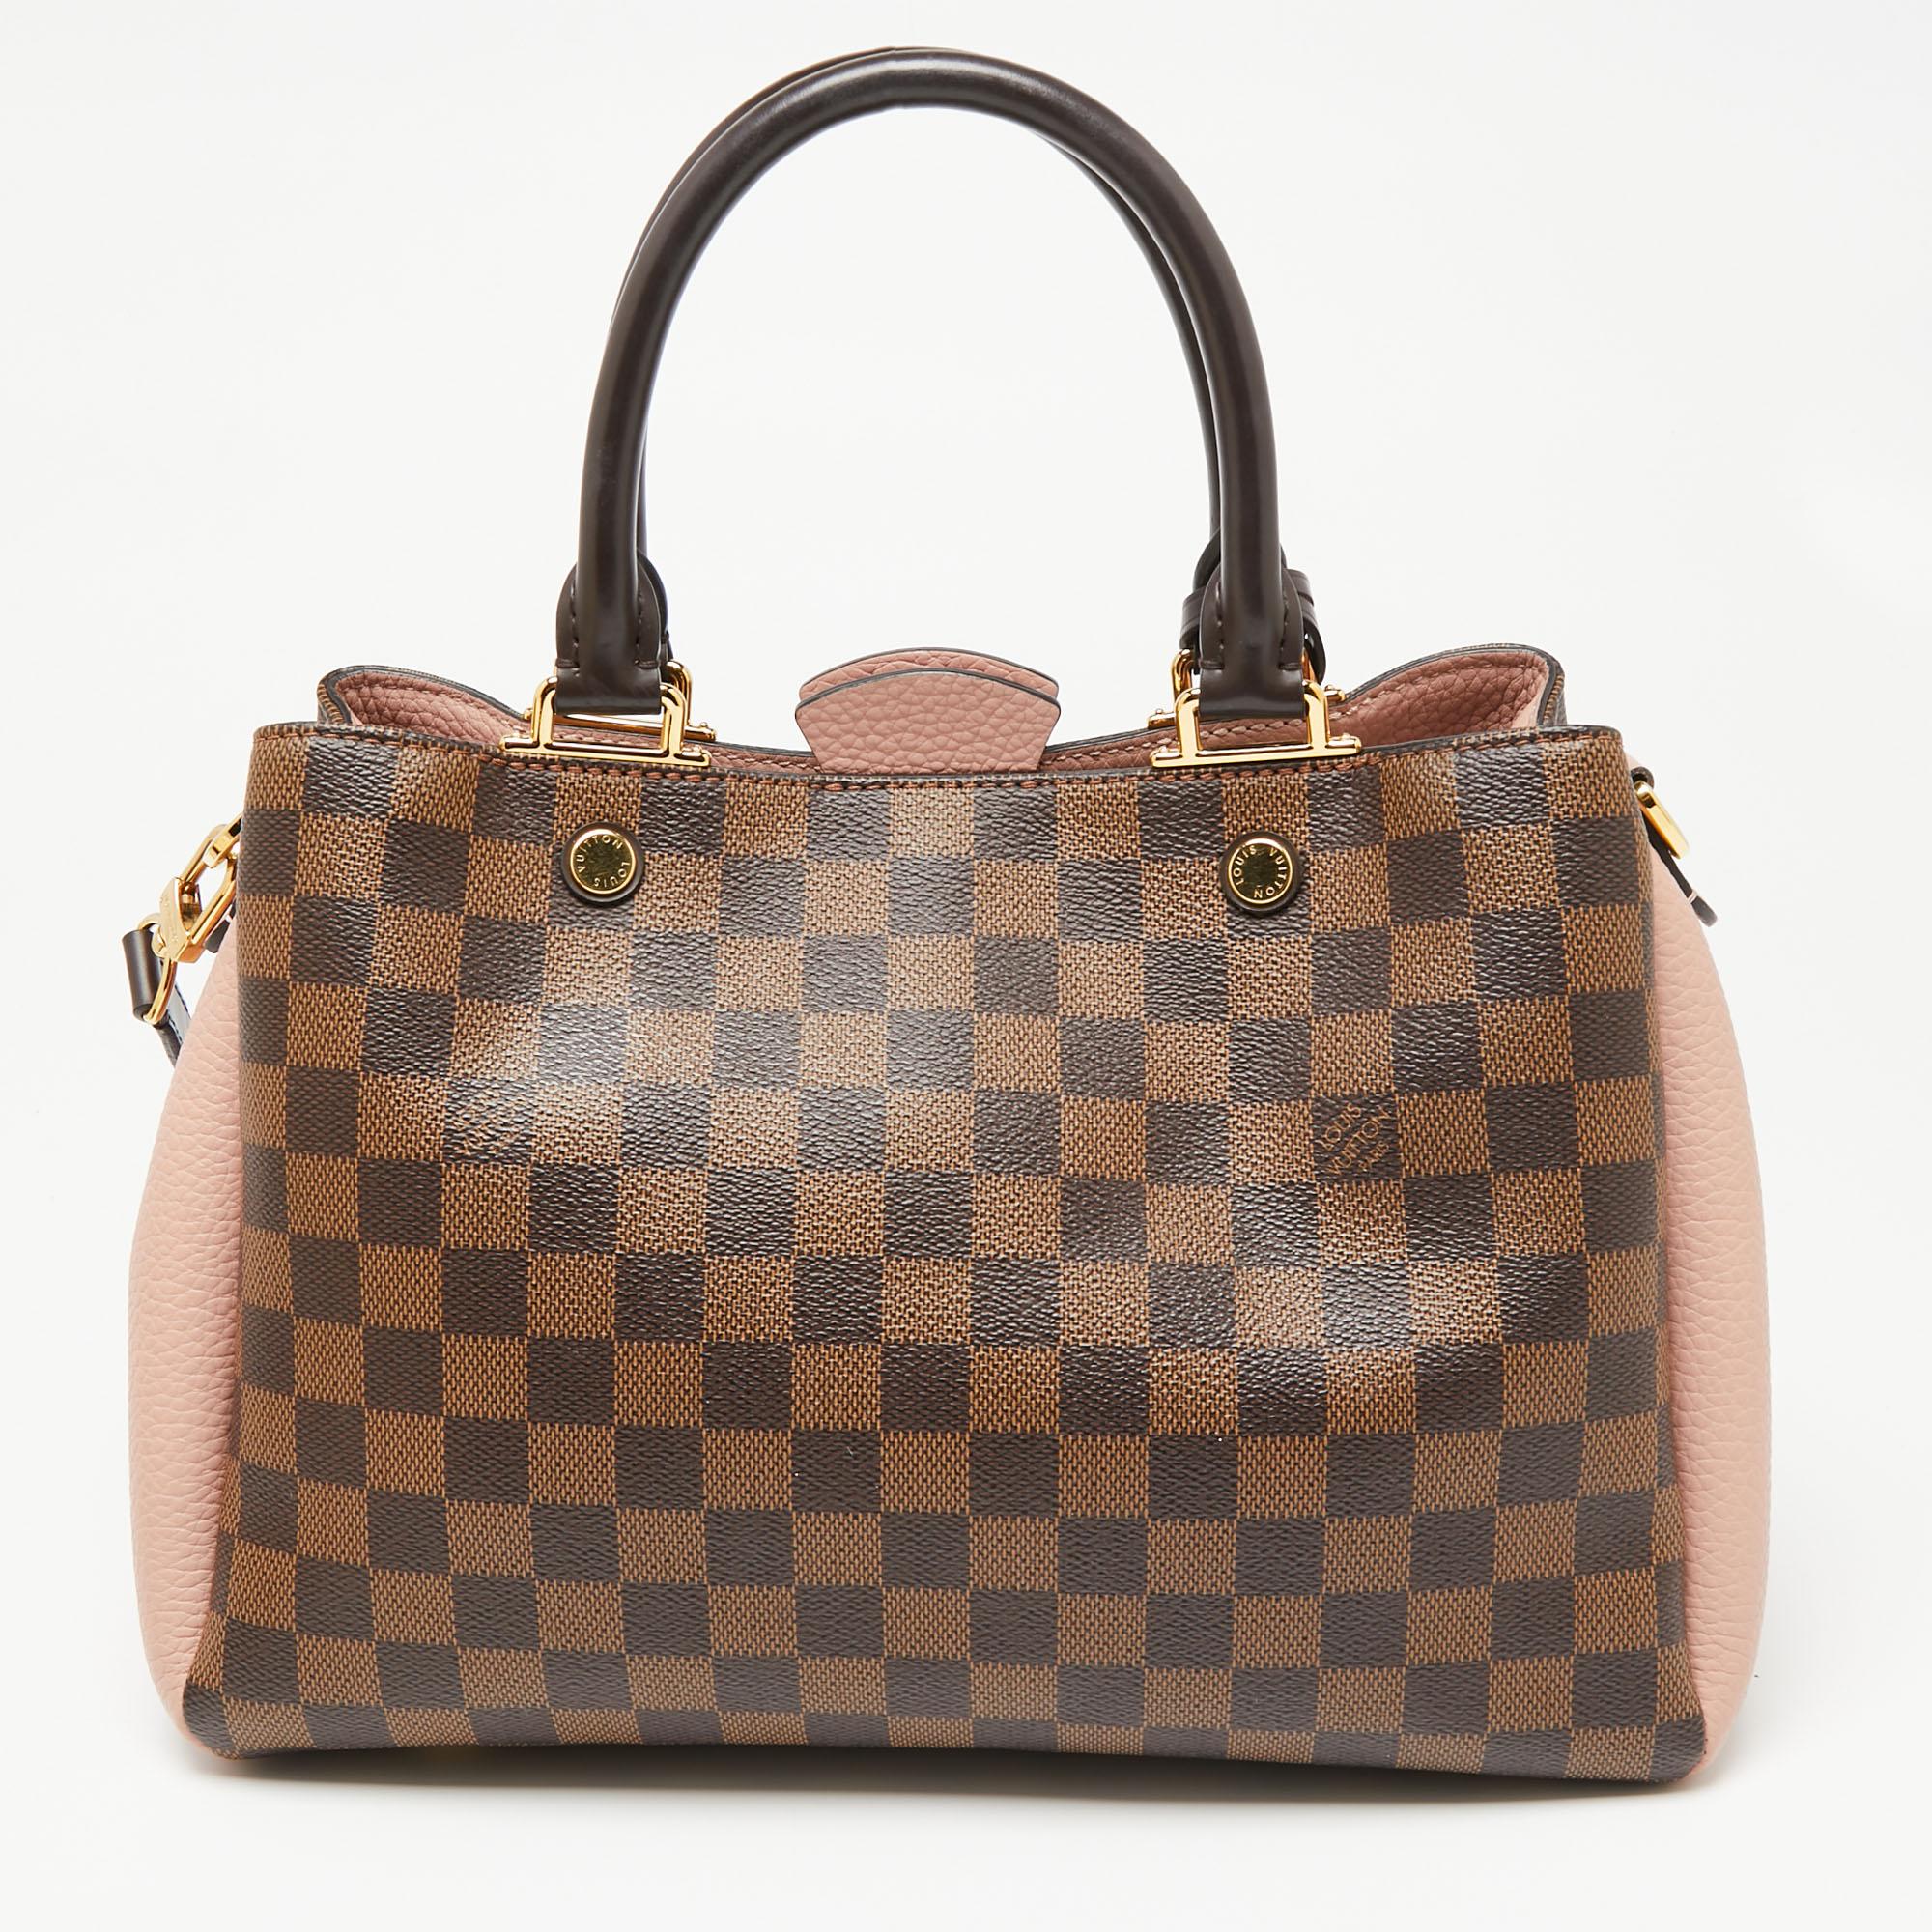 This Brittany handbag, from the house of Louis Vuitton, exhibits utility and classic appeal. It is crafted using Damier Ebene canvas and leather. With Alcantara lining, two top handles, and an optional strap, this bag will be an indispensable